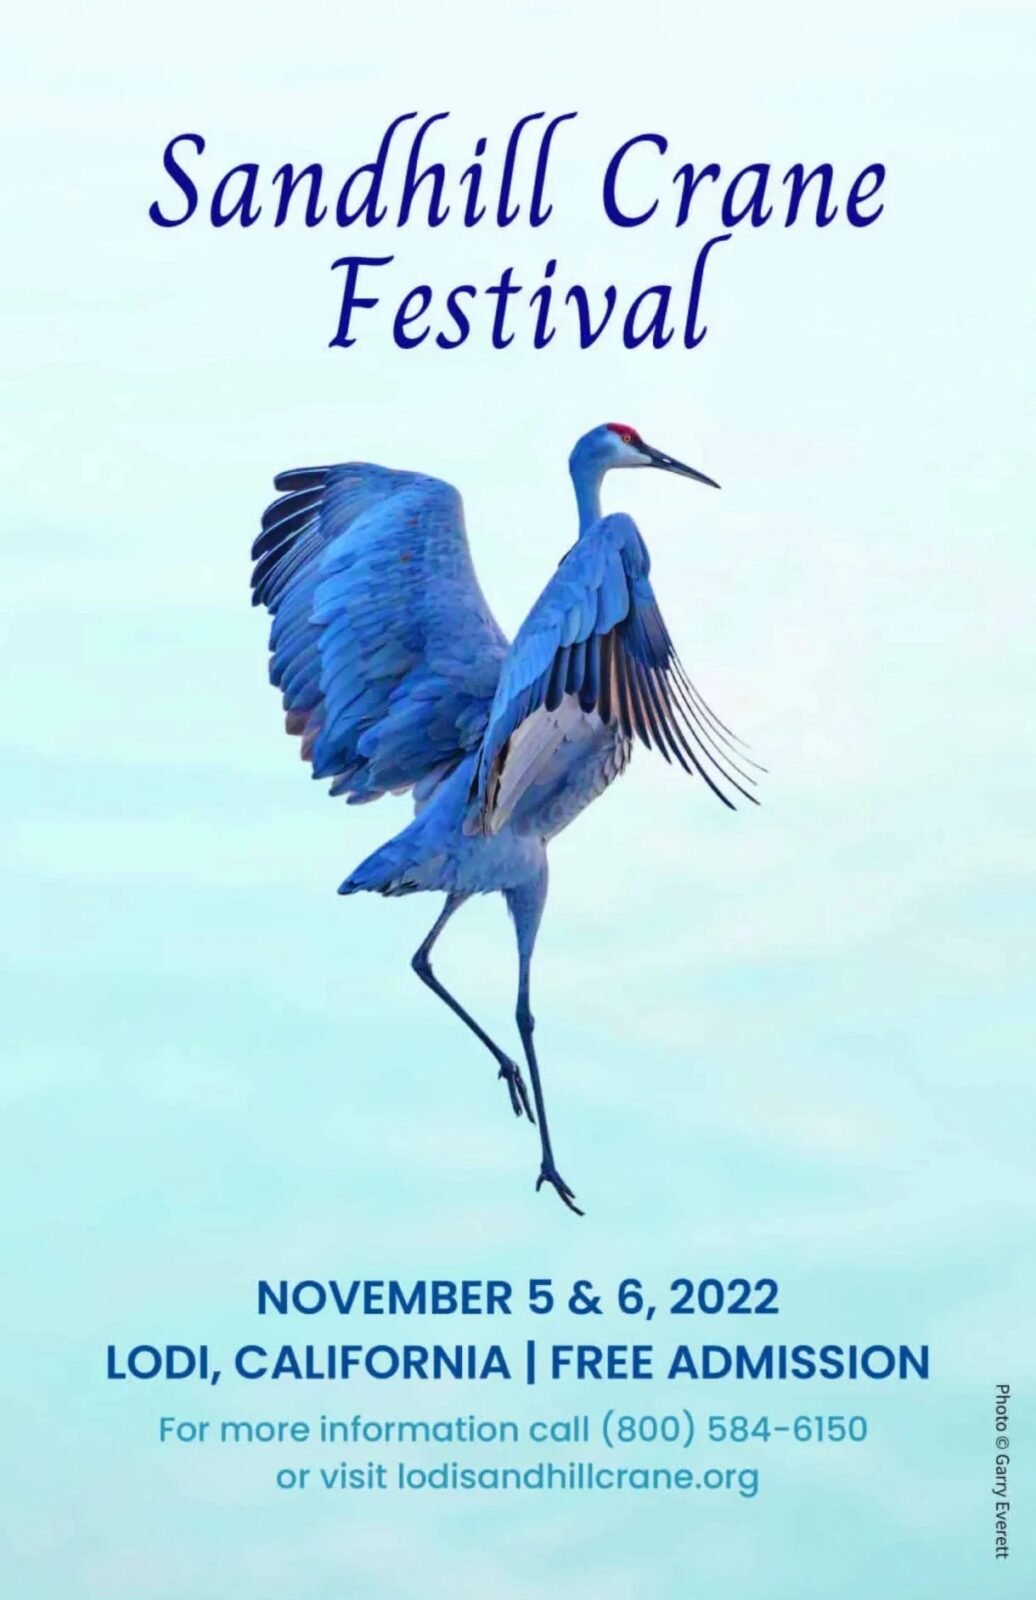 Advertising poster for Lodi Sandhill Crane Festival with photo of sandhill crane against a sea green background